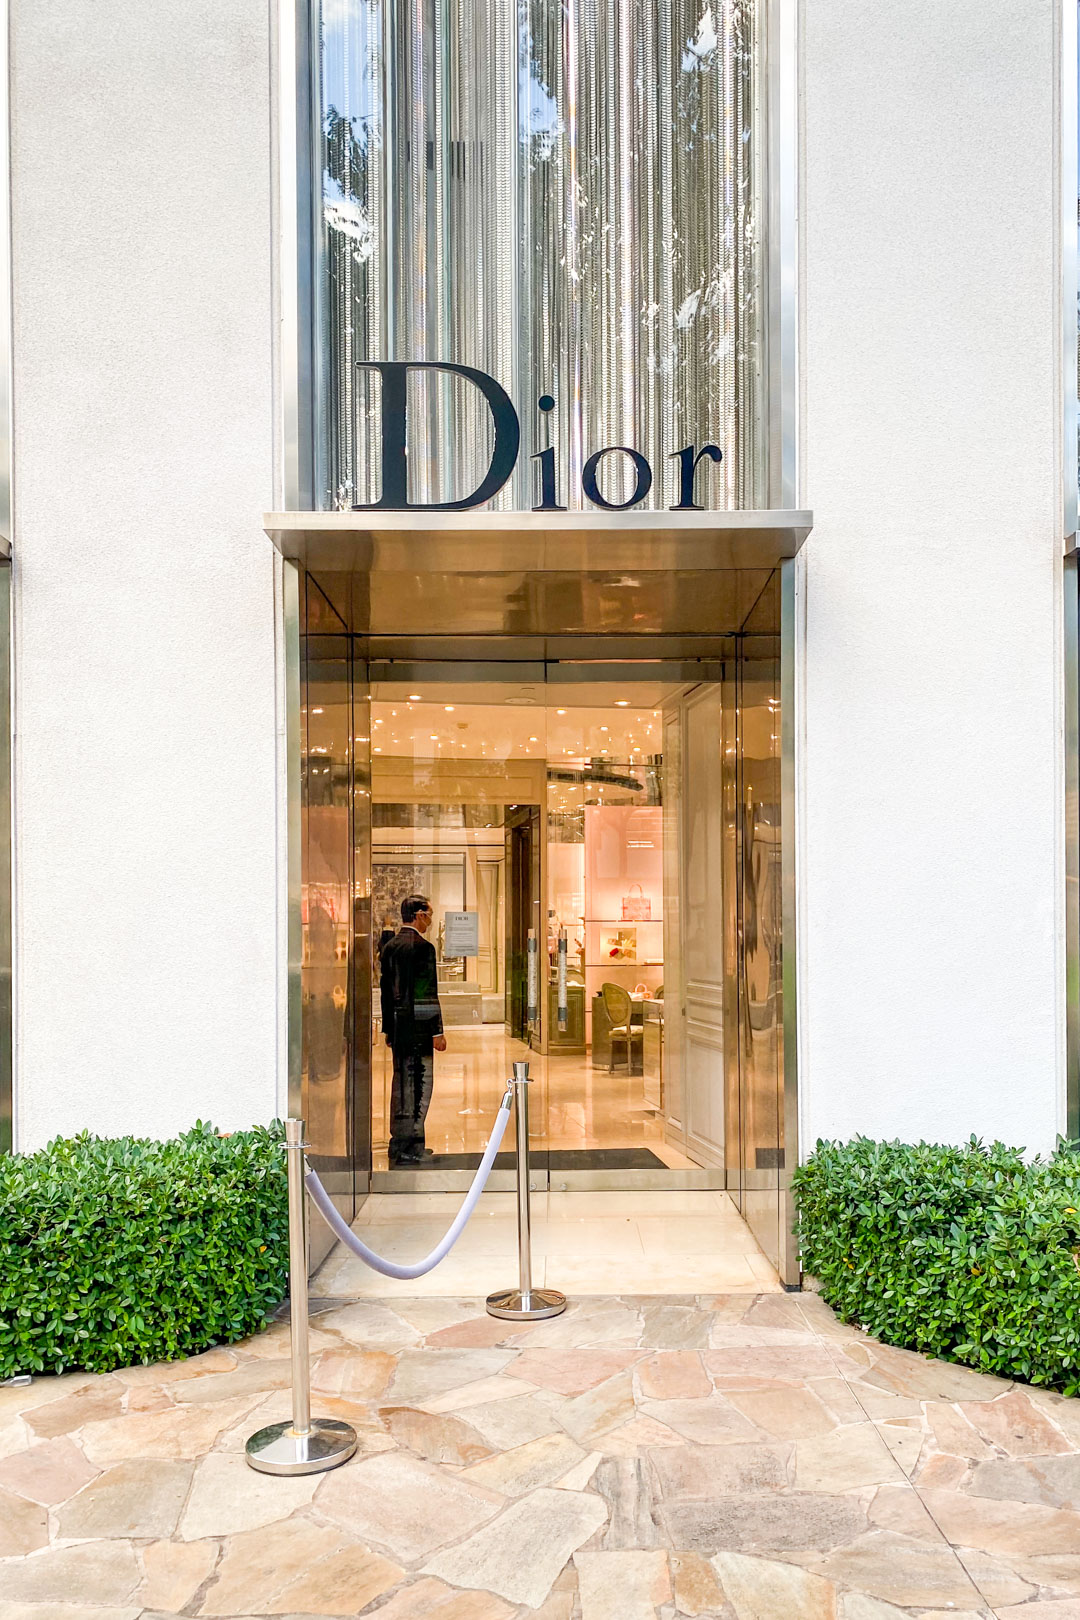 Cheap Dior 30 Montaigne Bags Outlet Sale, Christian Dior Outlet Store